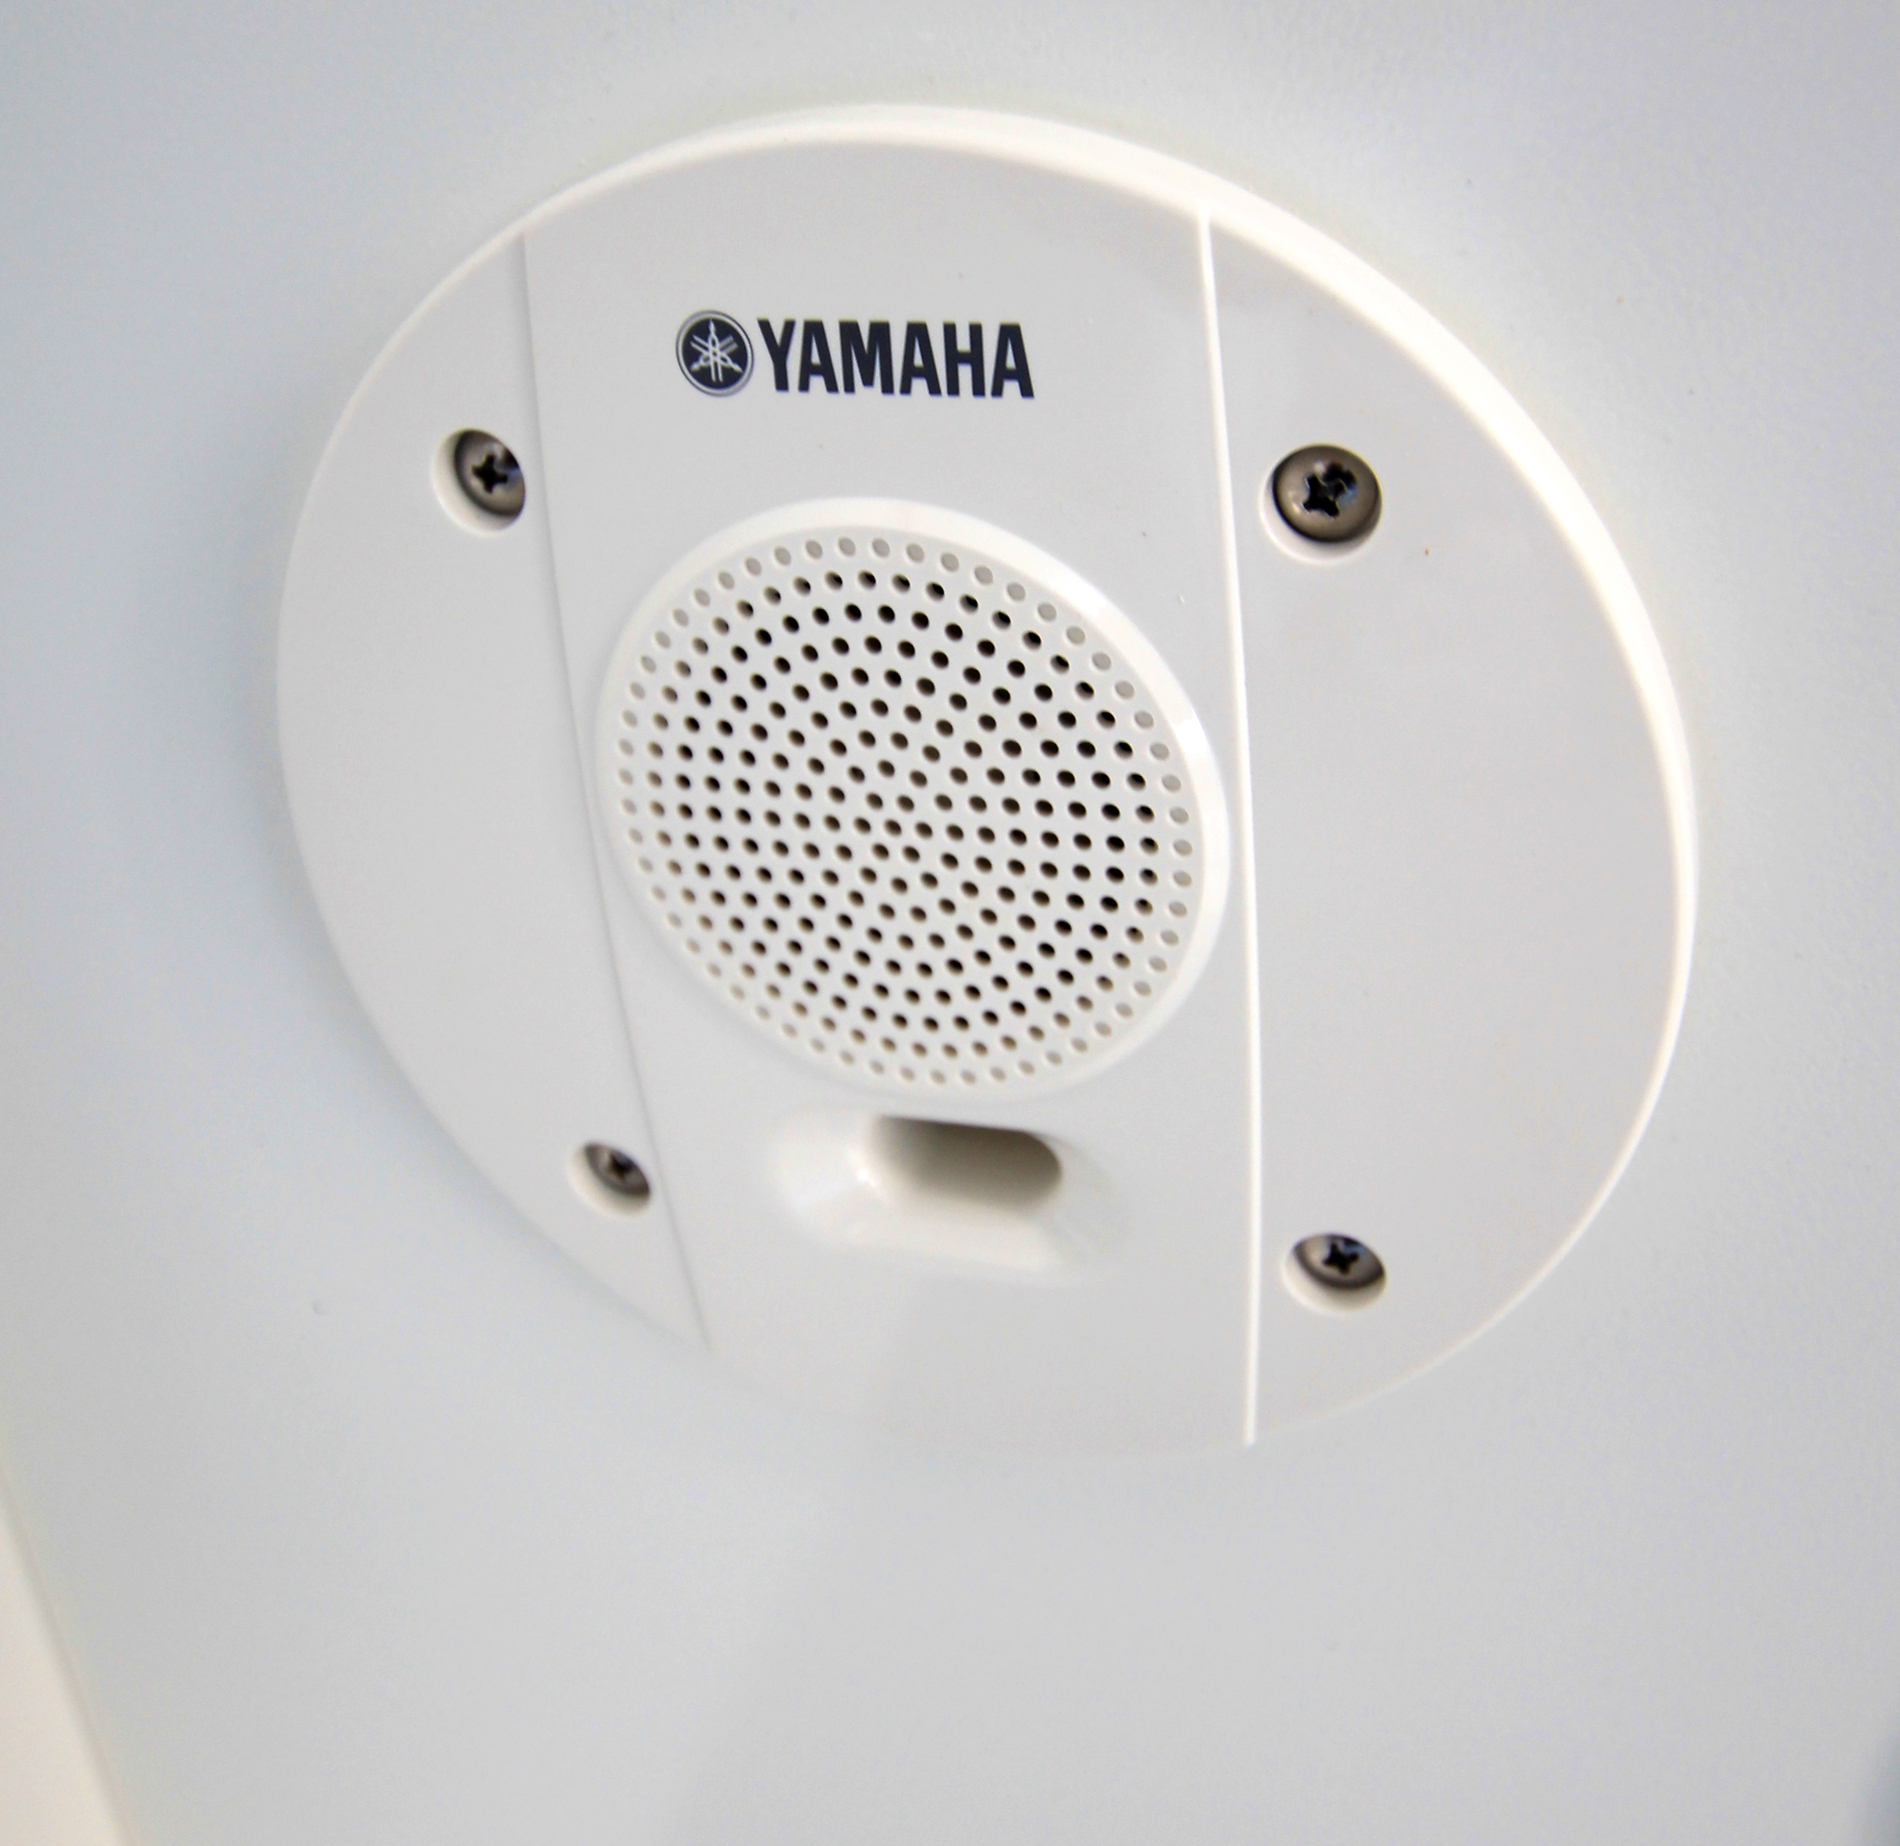 Other Equipment. It is also possible in the bath and enjoy the music. Standard equipped with a Yamaha sound shower (same specifications photo)